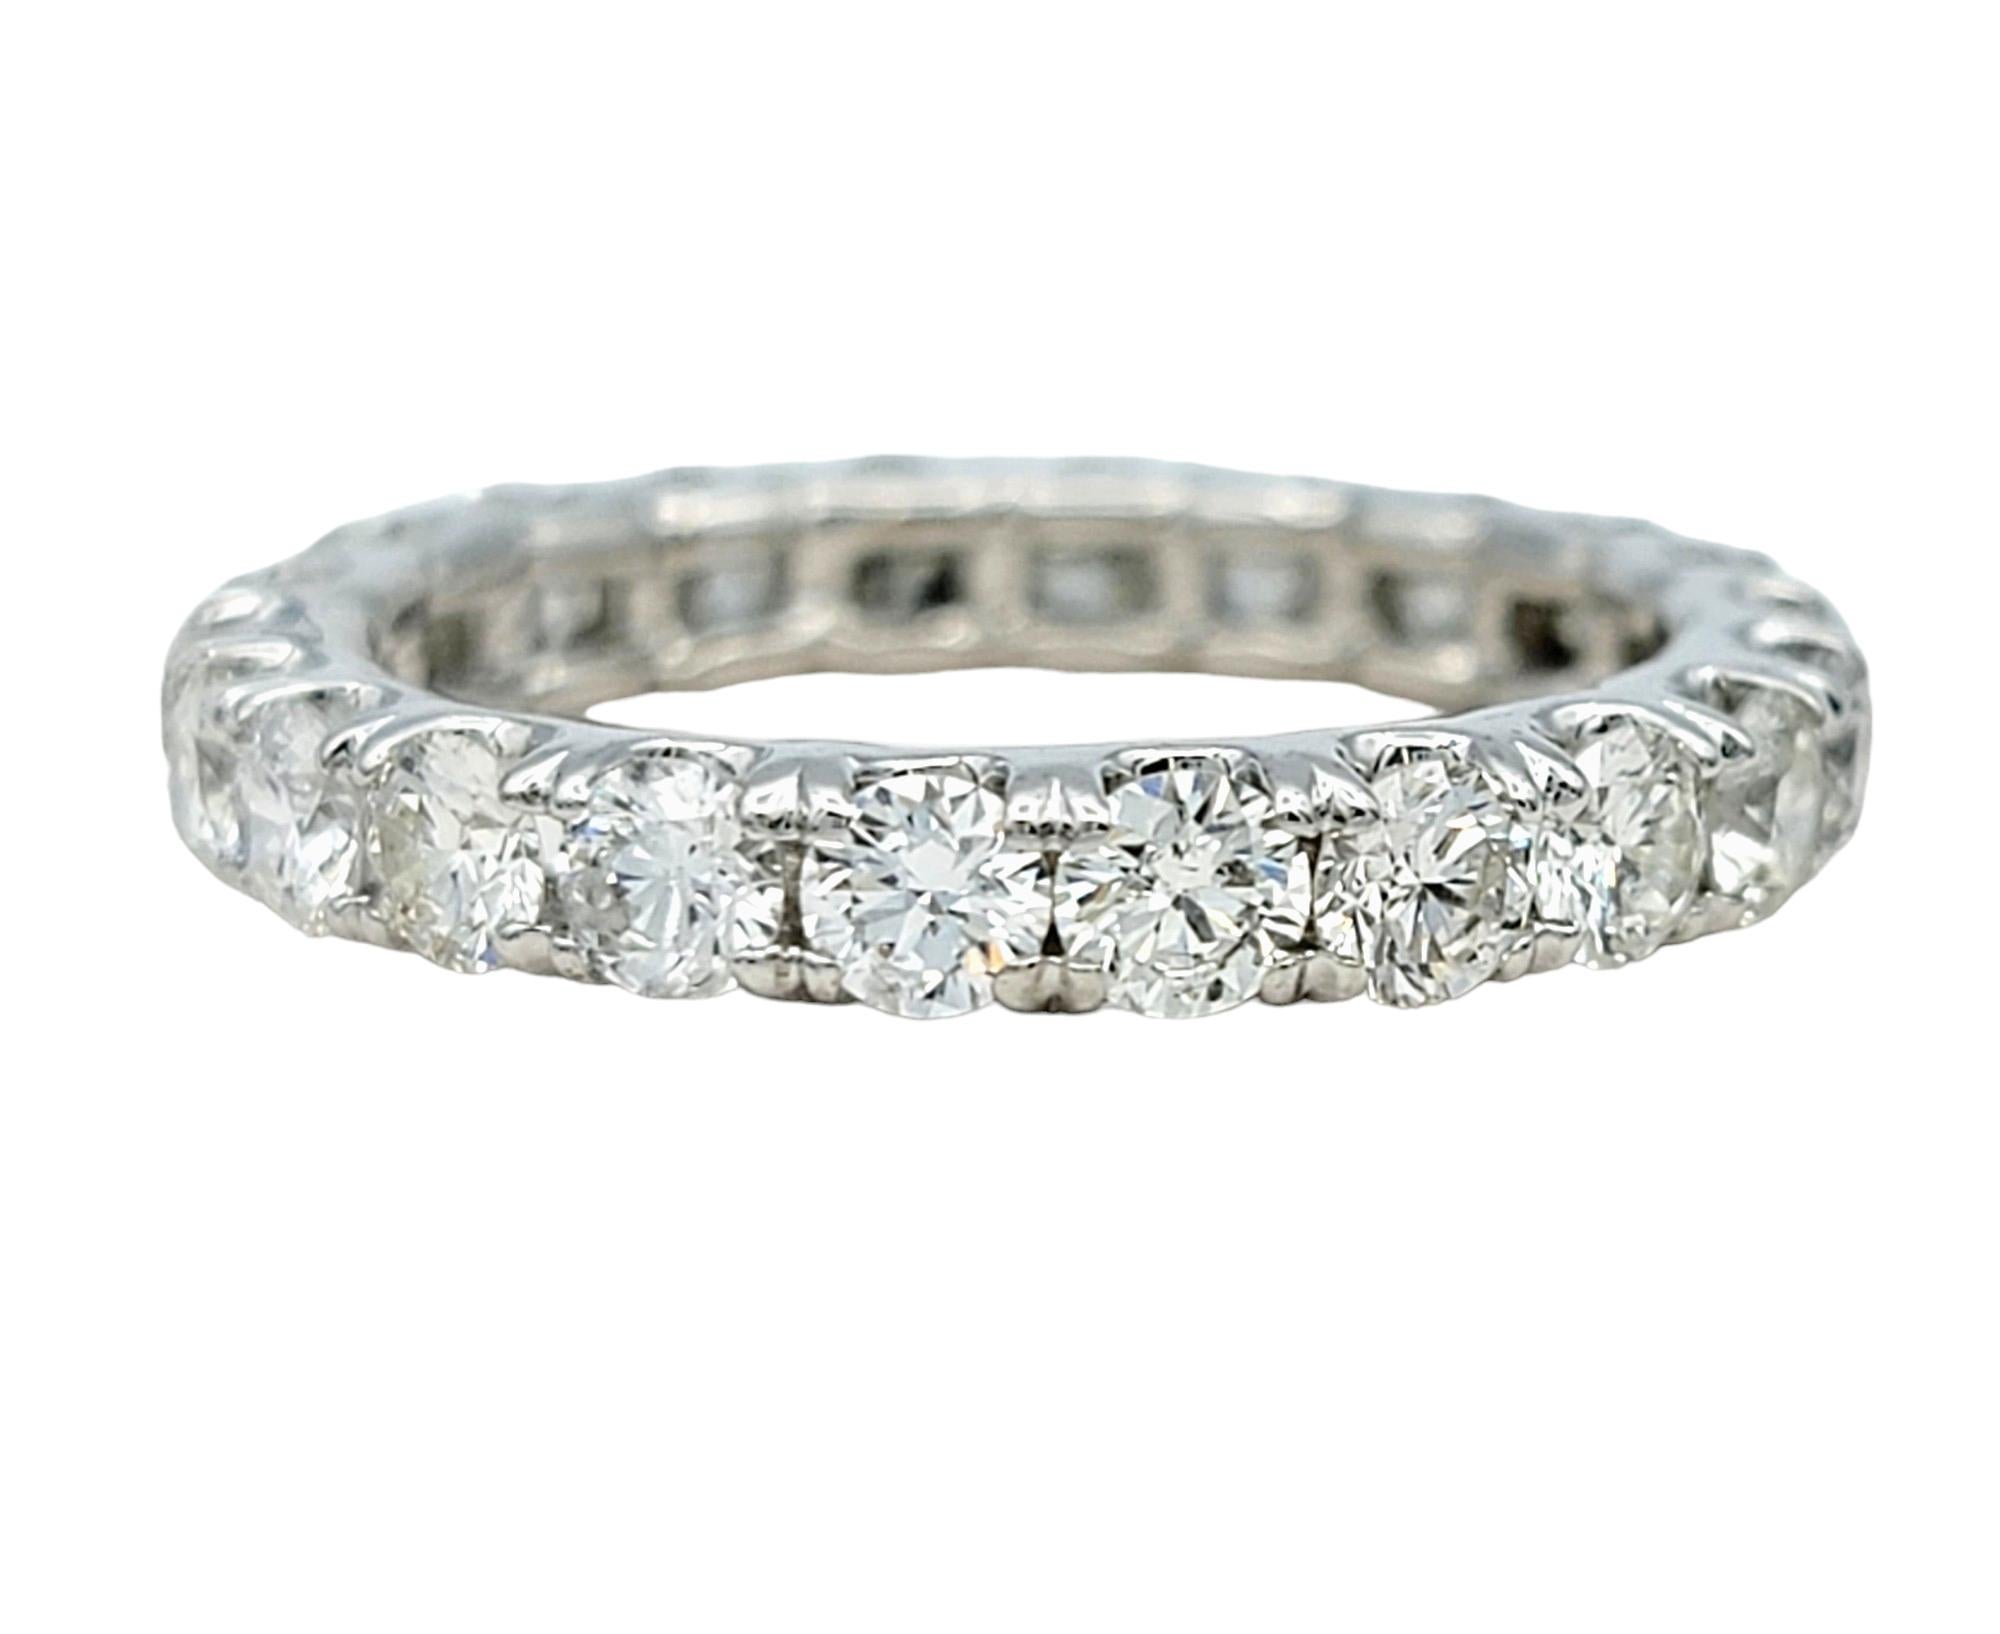 2.20 Carat Round Diamond Eternity Band Ring in 18 Karat White Gold, F-G / VS2 In Excellent Condition For Sale In Scottsdale, AZ